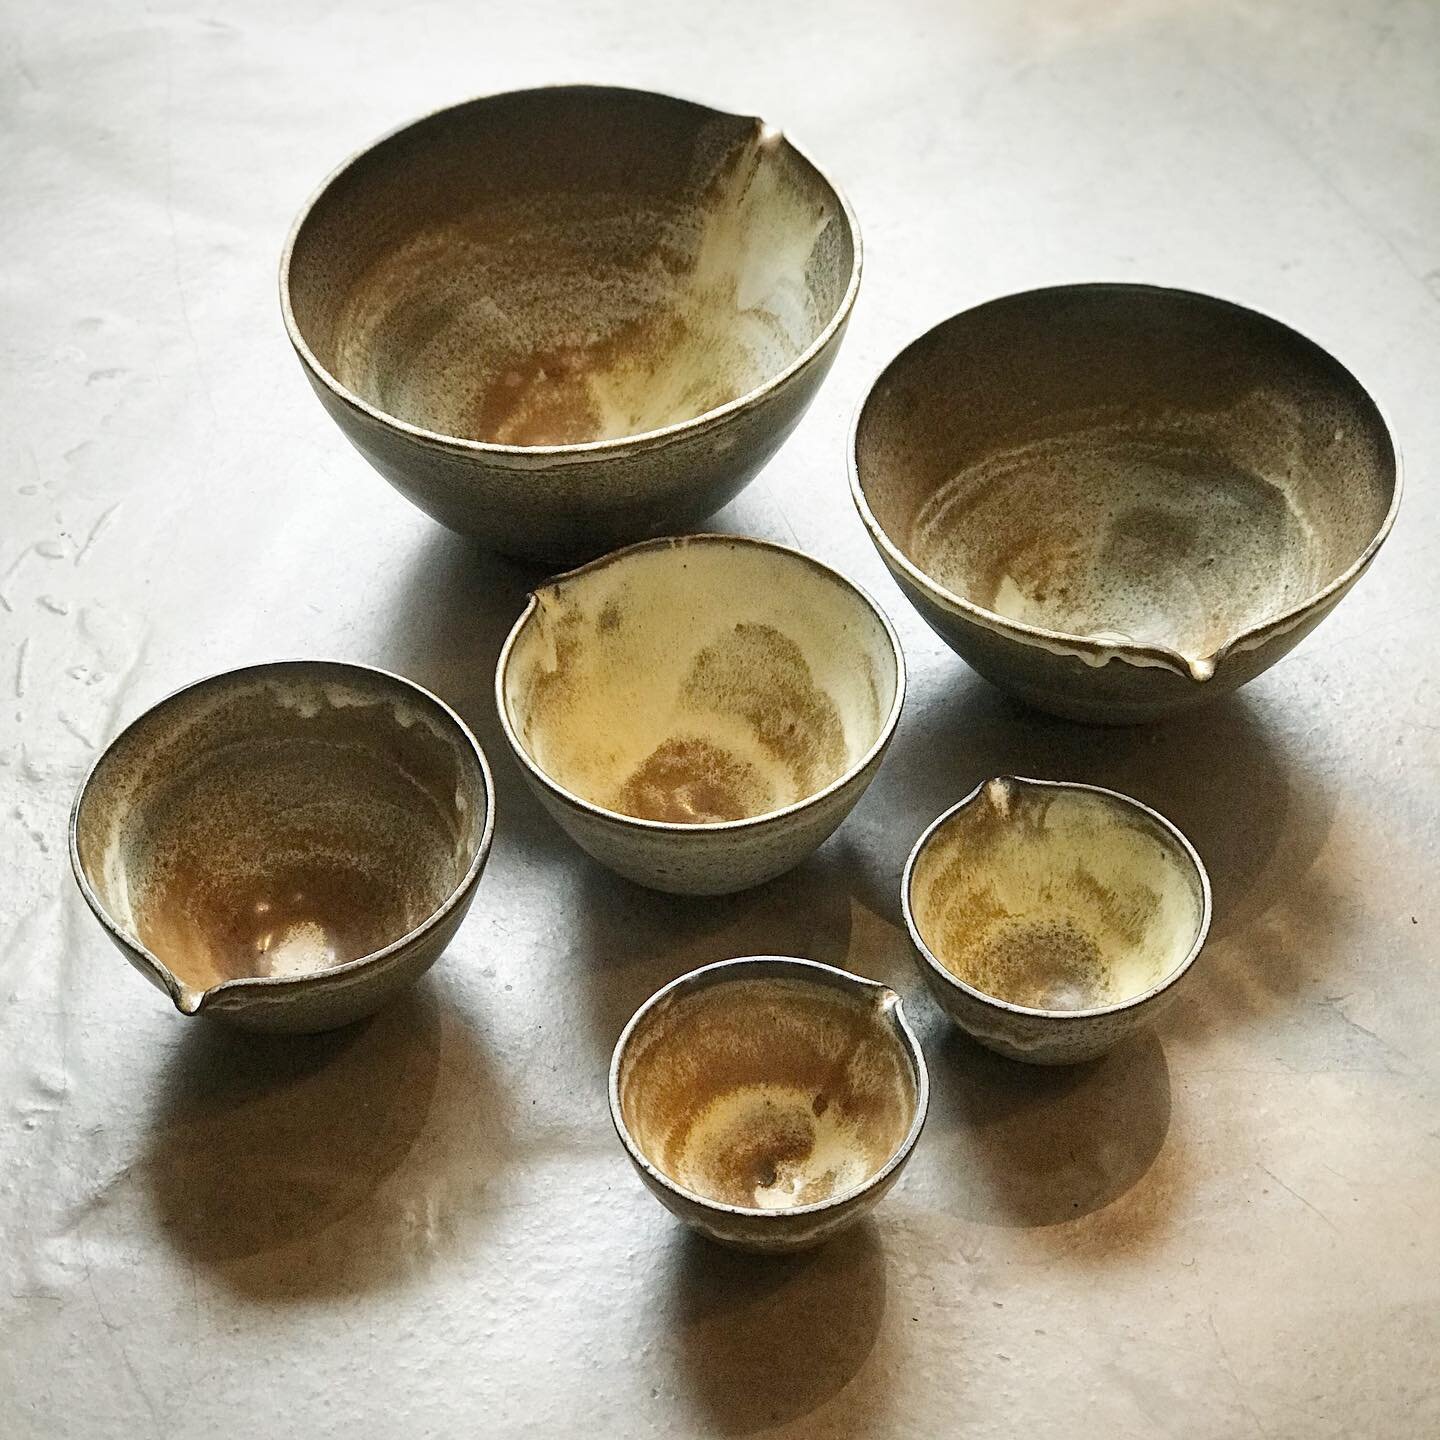 .
Bowls in many sizes
Check back in my feed, if you&rsquo;d like to see them being glazed. You might not reckognize them - they start out red, then white and end up this warm, variated, streaky, unpredictable ..color/texture..